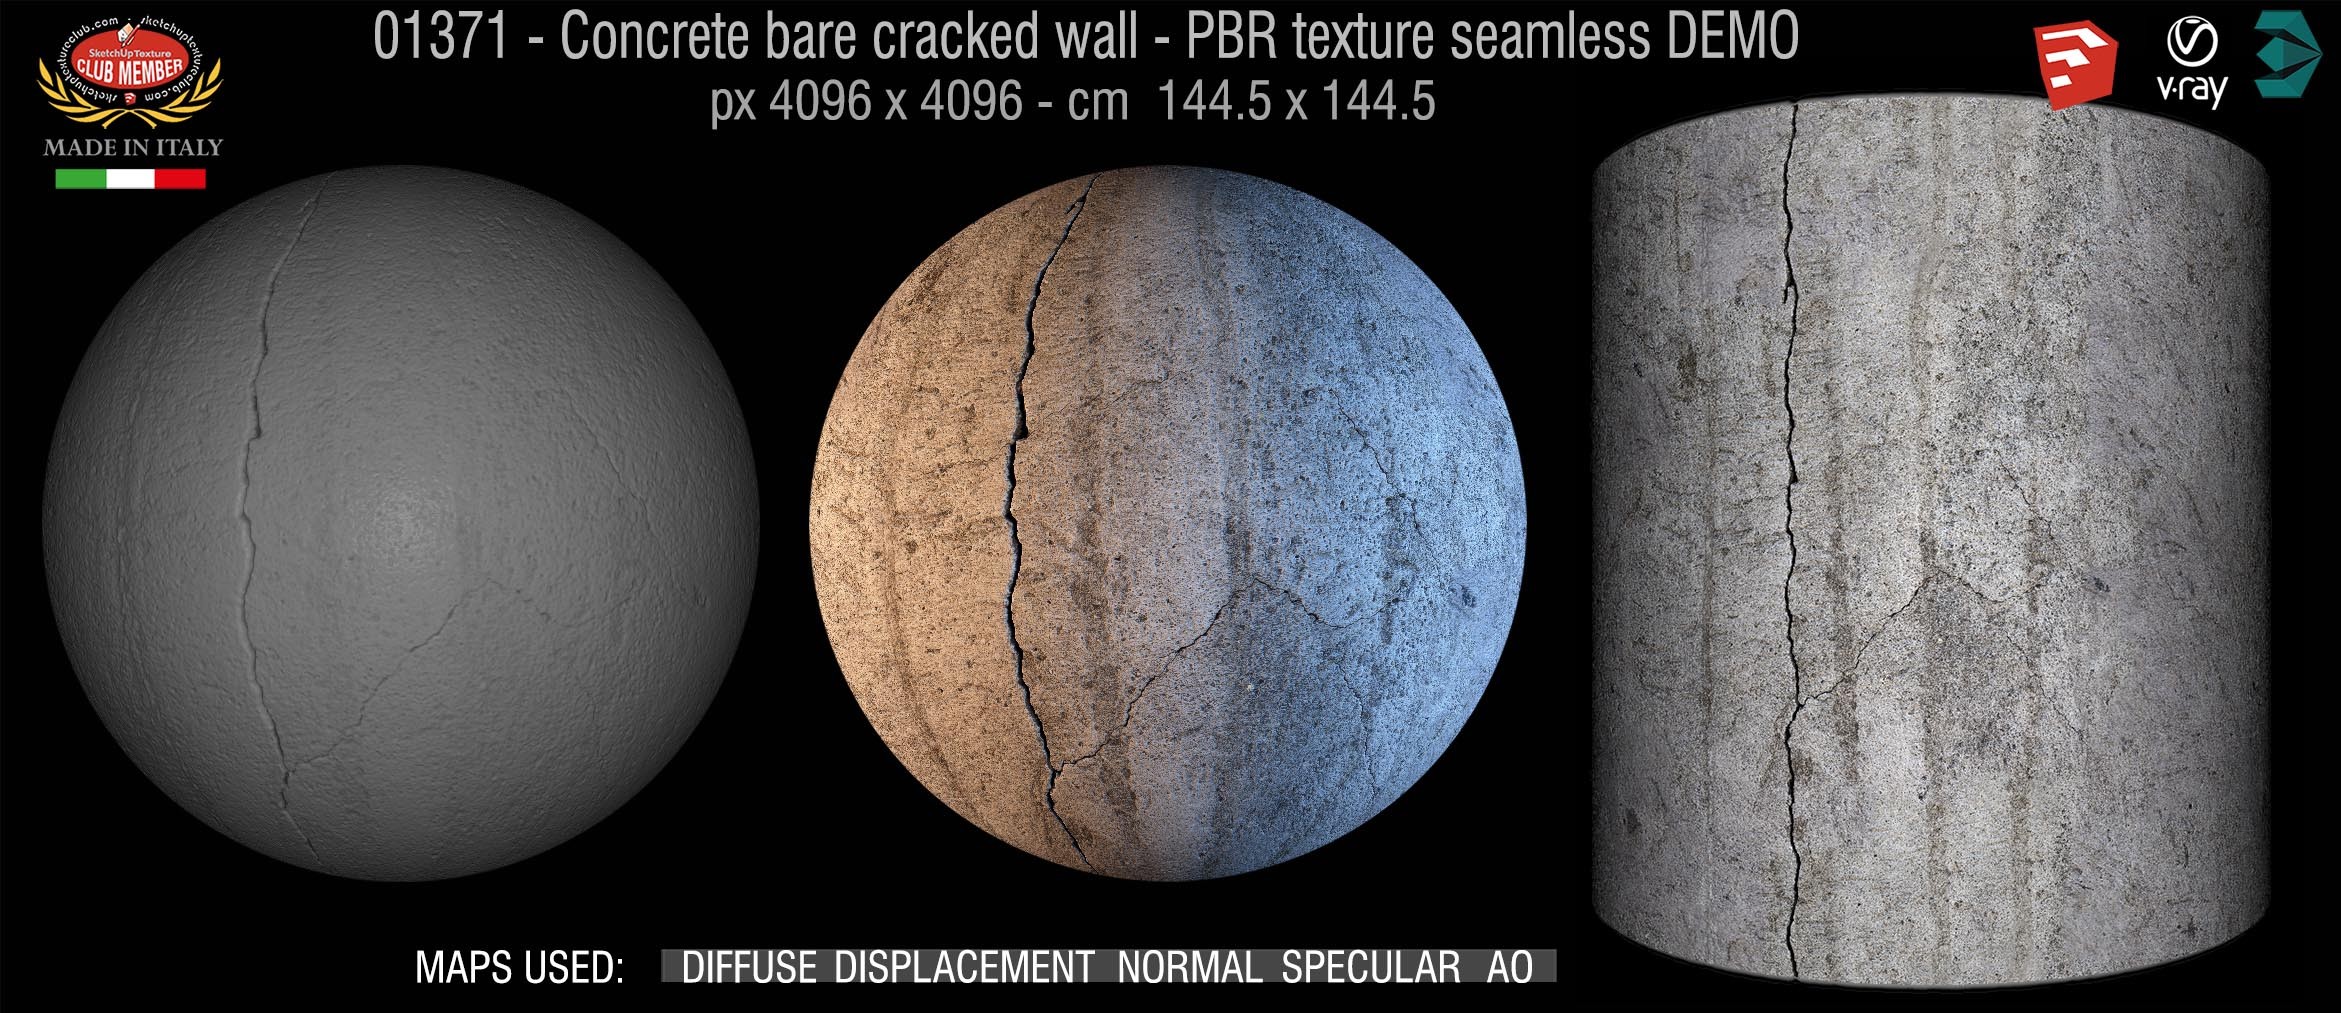 01371 Concrete bare cracked wall PBR texture seamless DEMO